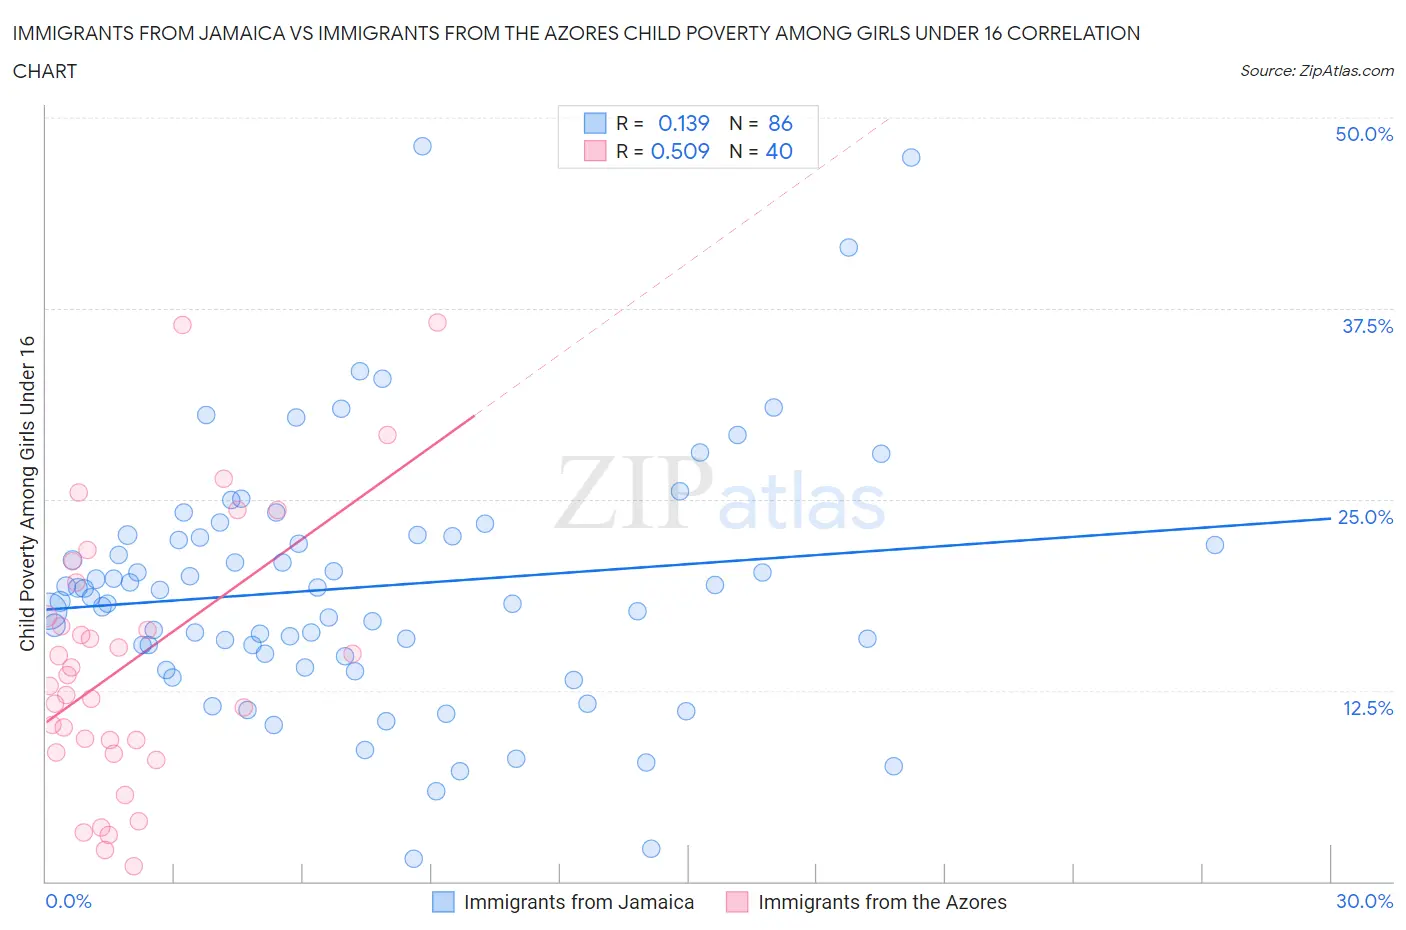 Immigrants from Jamaica vs Immigrants from the Azores Child Poverty Among Girls Under 16